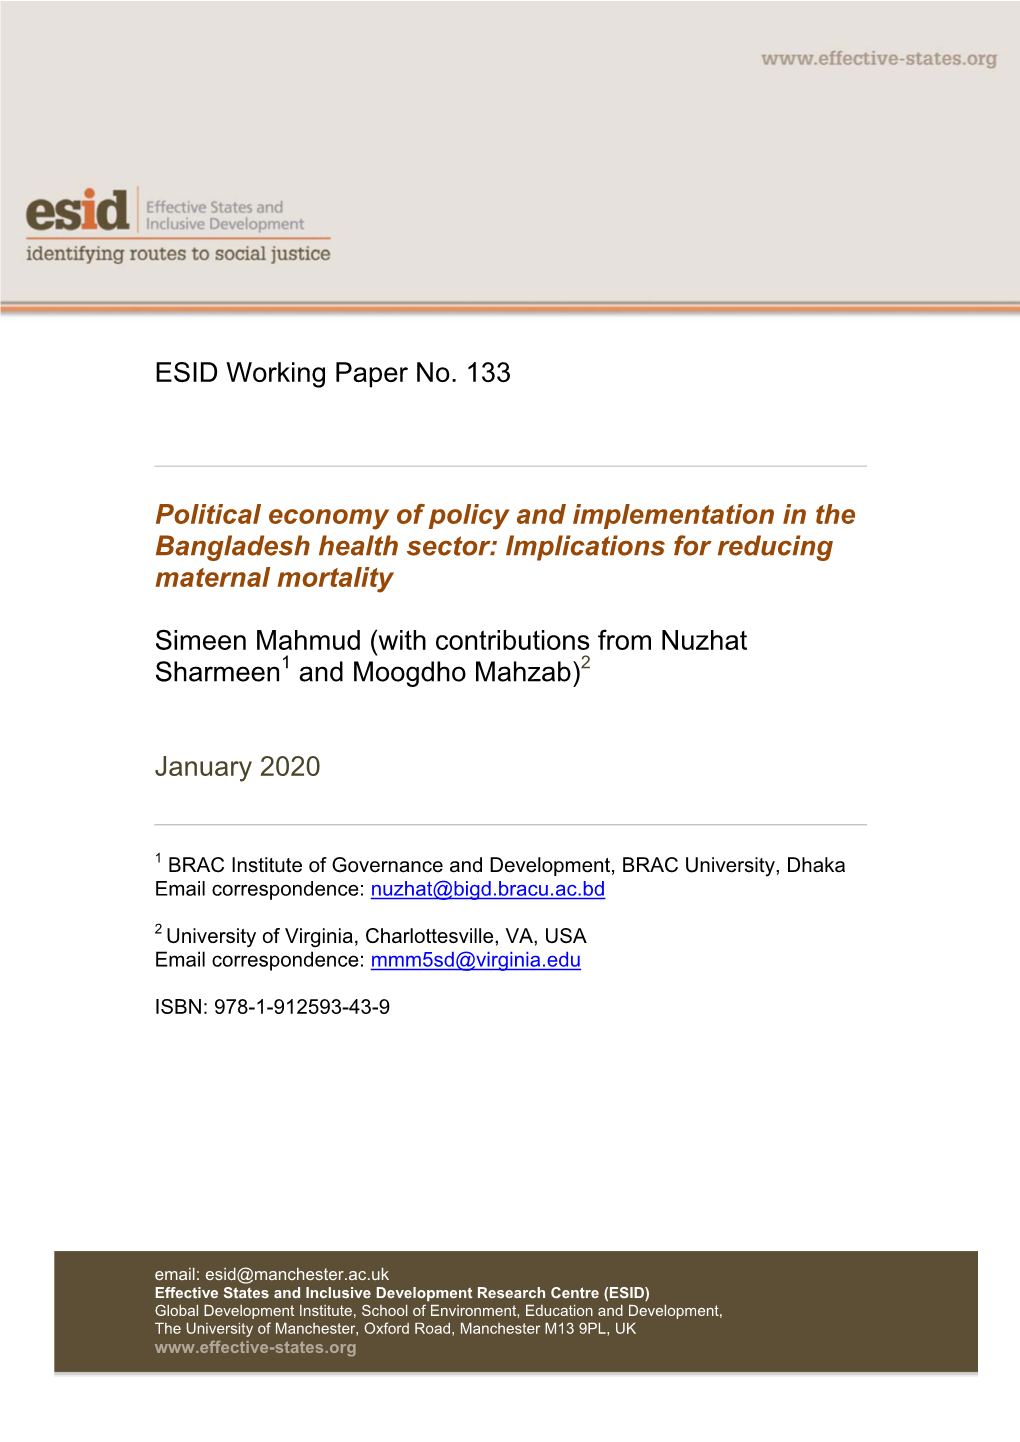 ESID Working Paper No. 133 Political Economy of Policy And